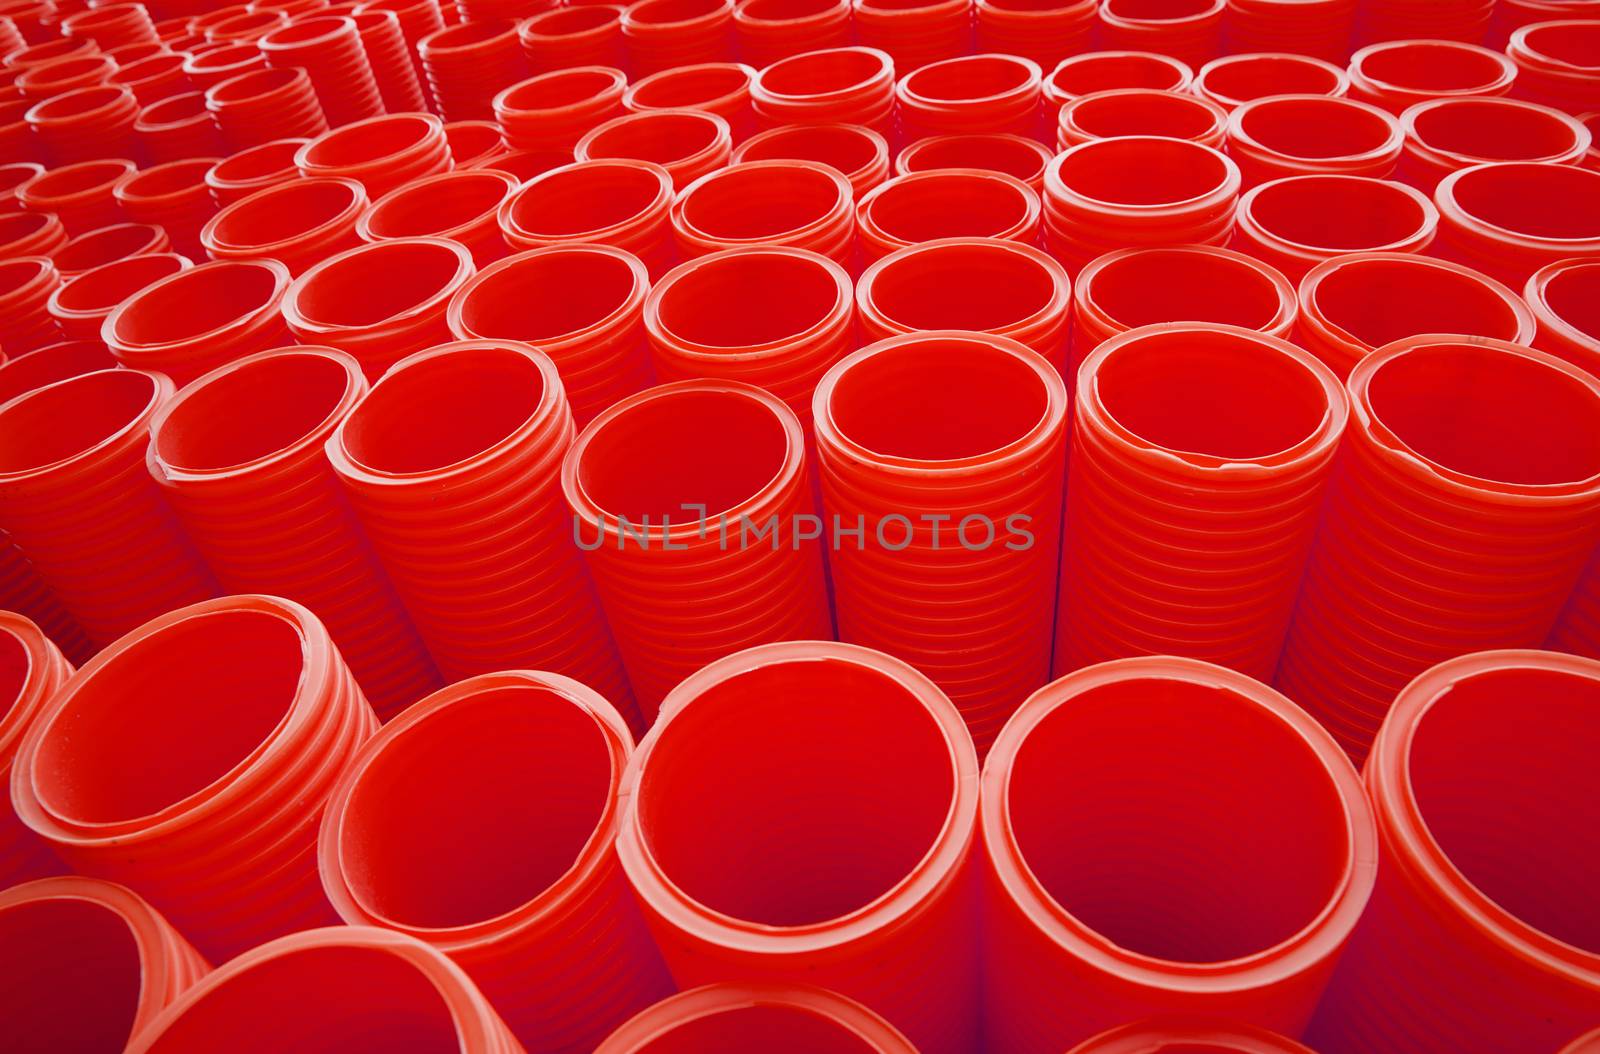 Large Group of Red Industrial Plastic Pipes Full Frame